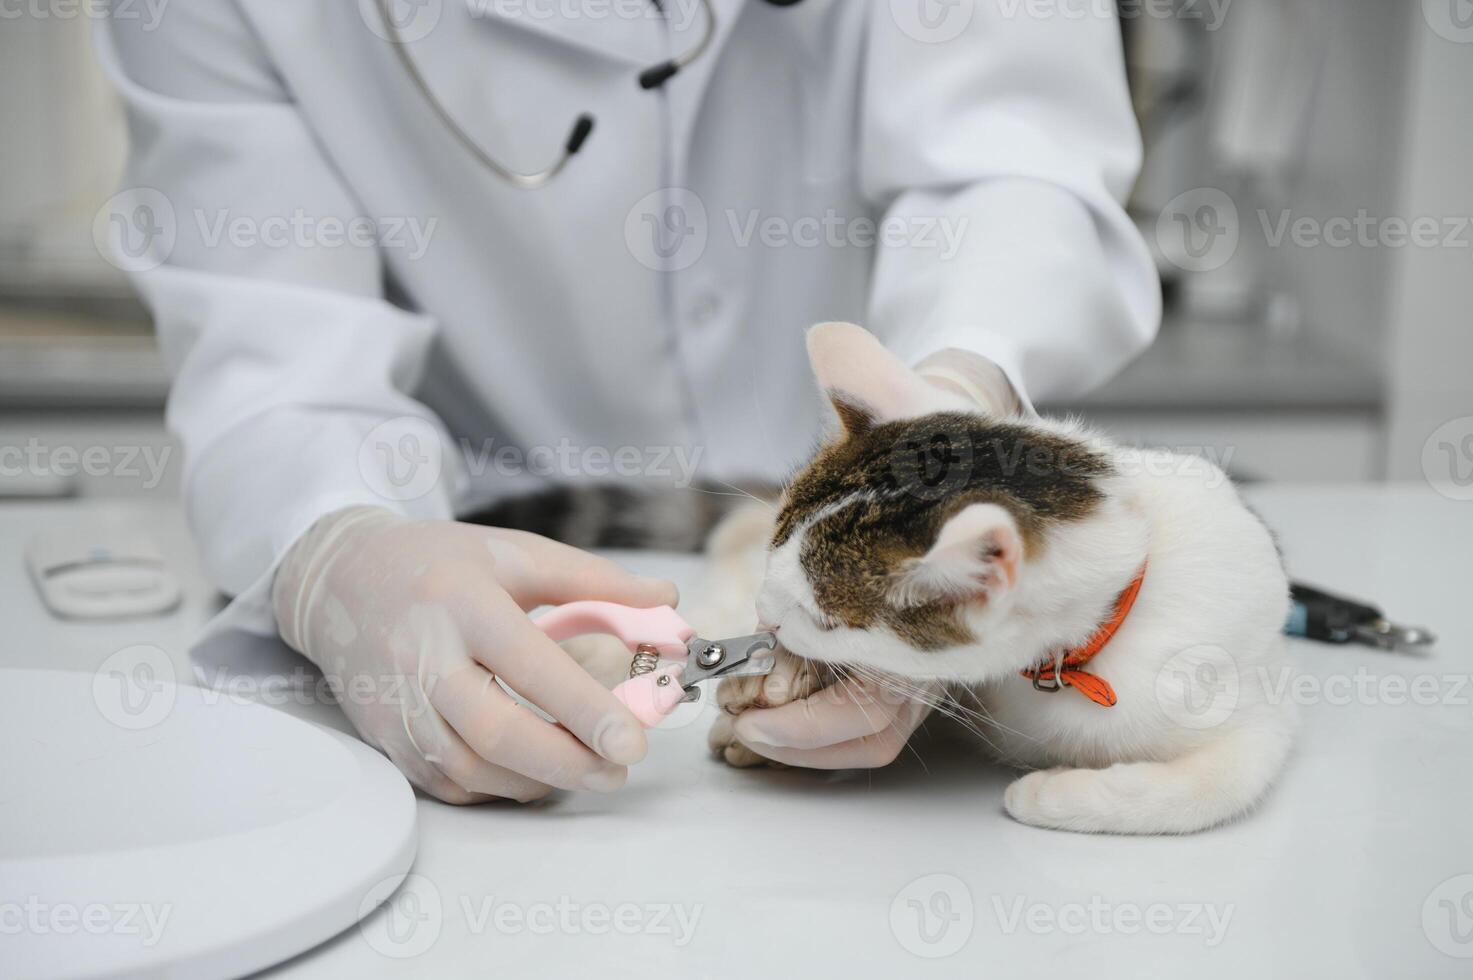 male doctor, veterinarian, with a stethoscope in veterinary clinic conducts examination and medical examination of domestic cat, concept of medical veterinary care, pet health. photo